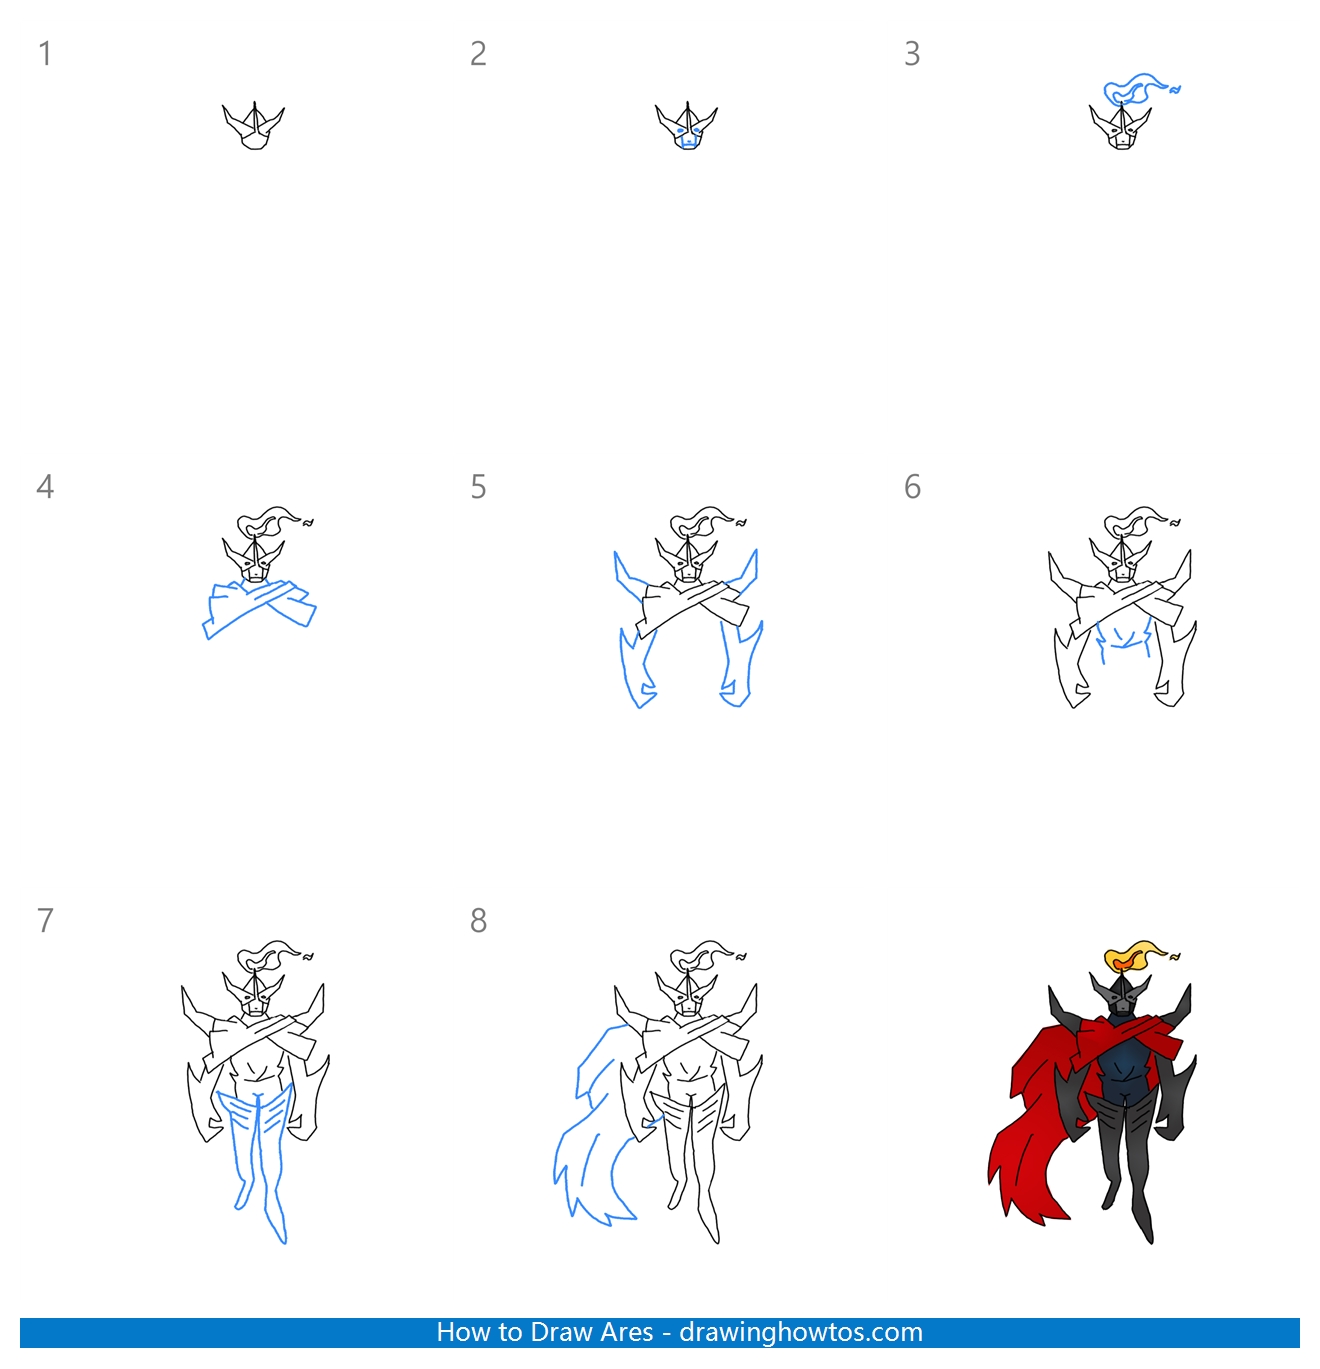 How to Draw Ares Step by Step